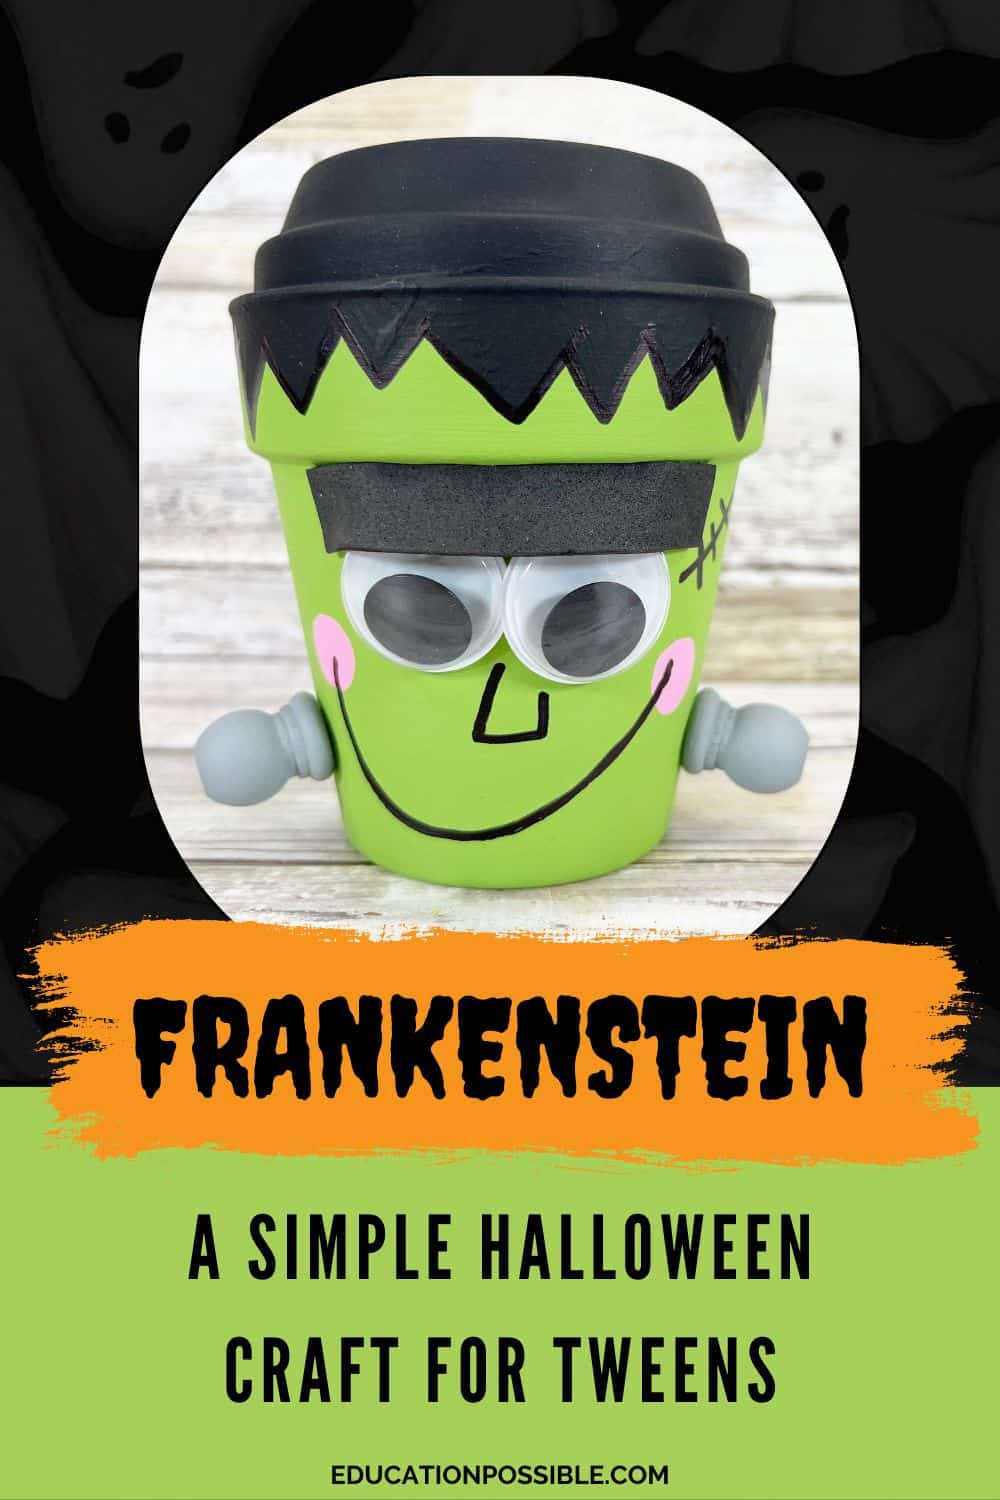 Finished DIY craft - clay pot painted like Frankenstein